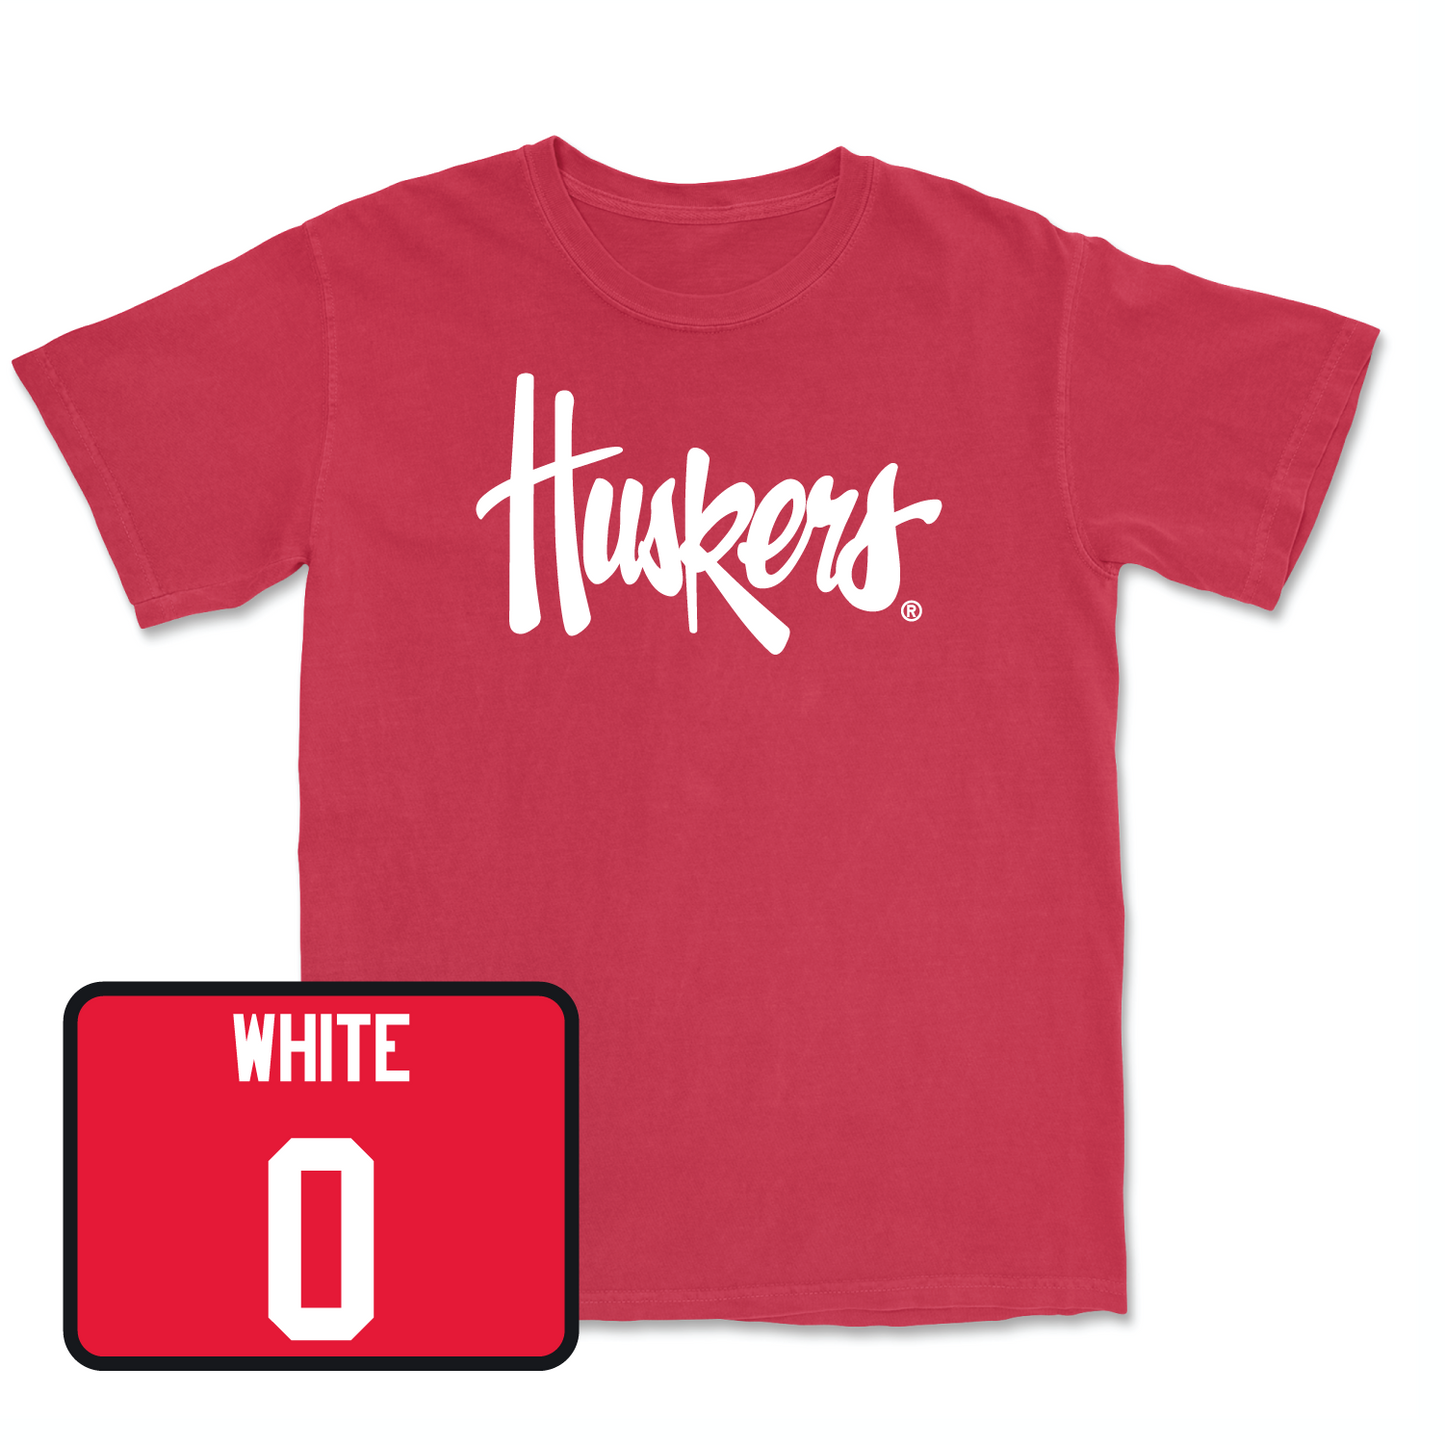 Red Women's Basketball Huskers Tee Large / Darian White | #0